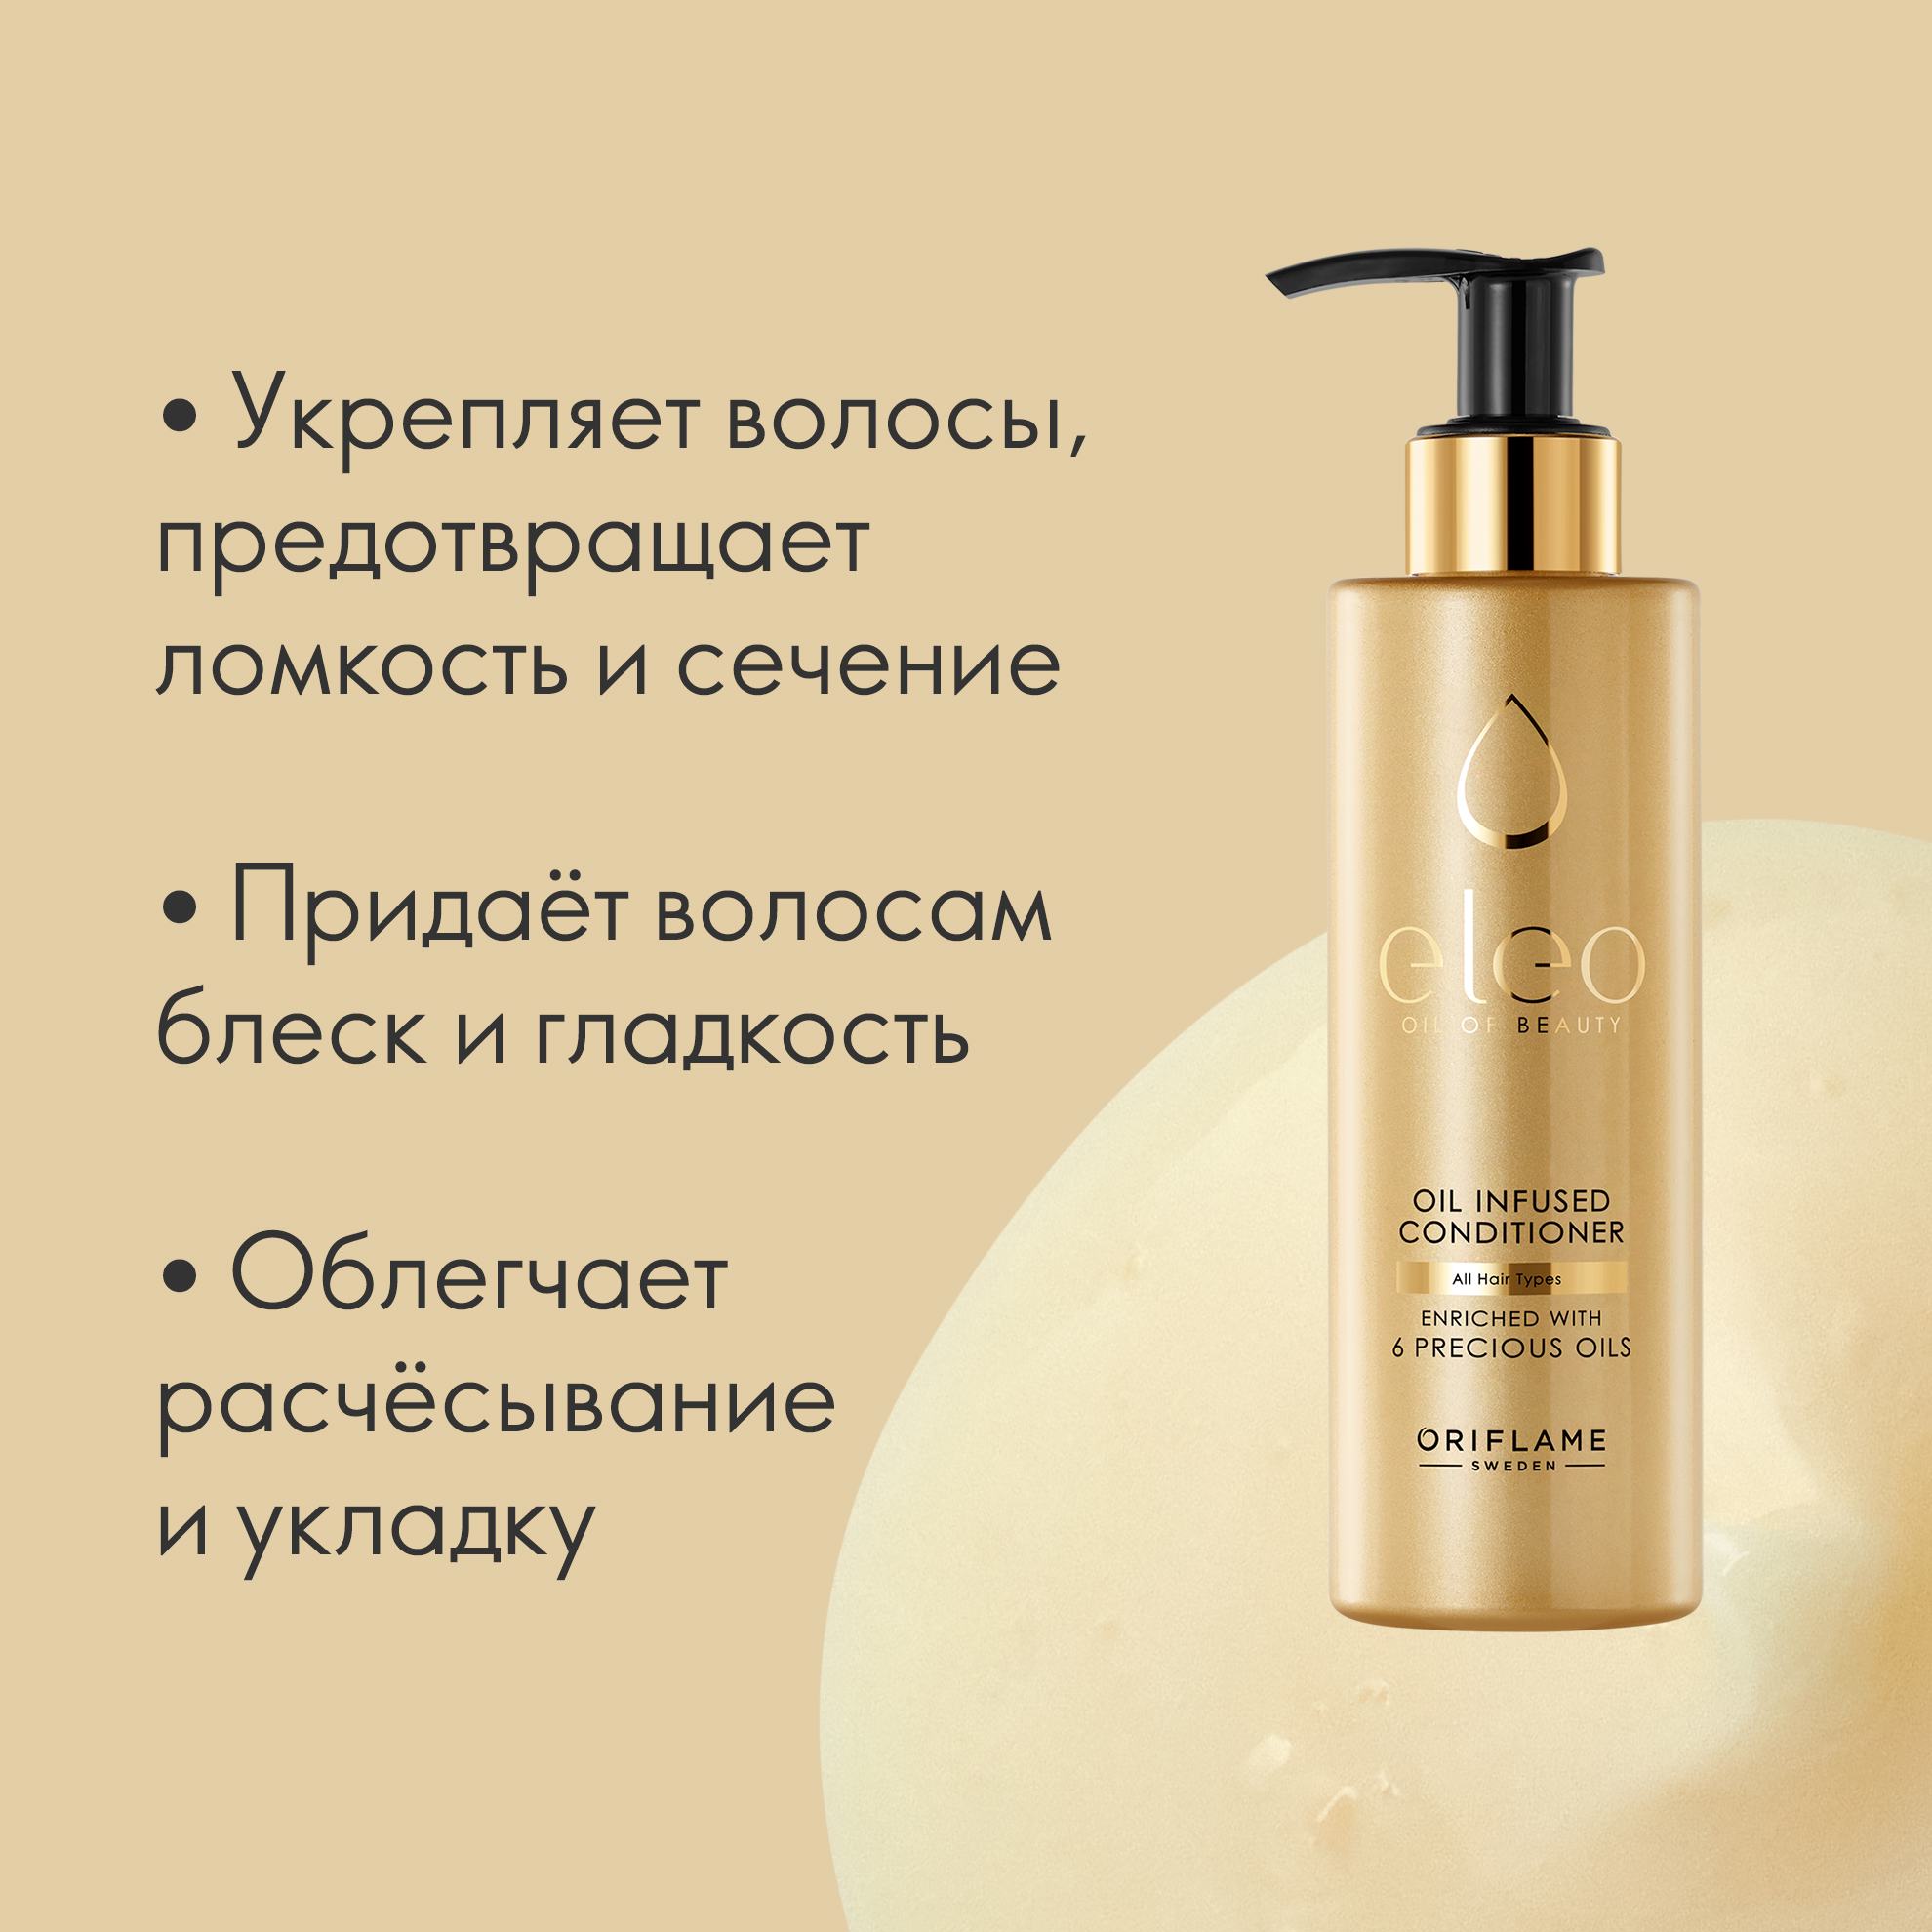 https://media-cdn.oriflame.com/productImage?externalMediaId=product-management-media%2fProducts%2f38597%2fRU%2f38597_4.png&id=15404434&version=1